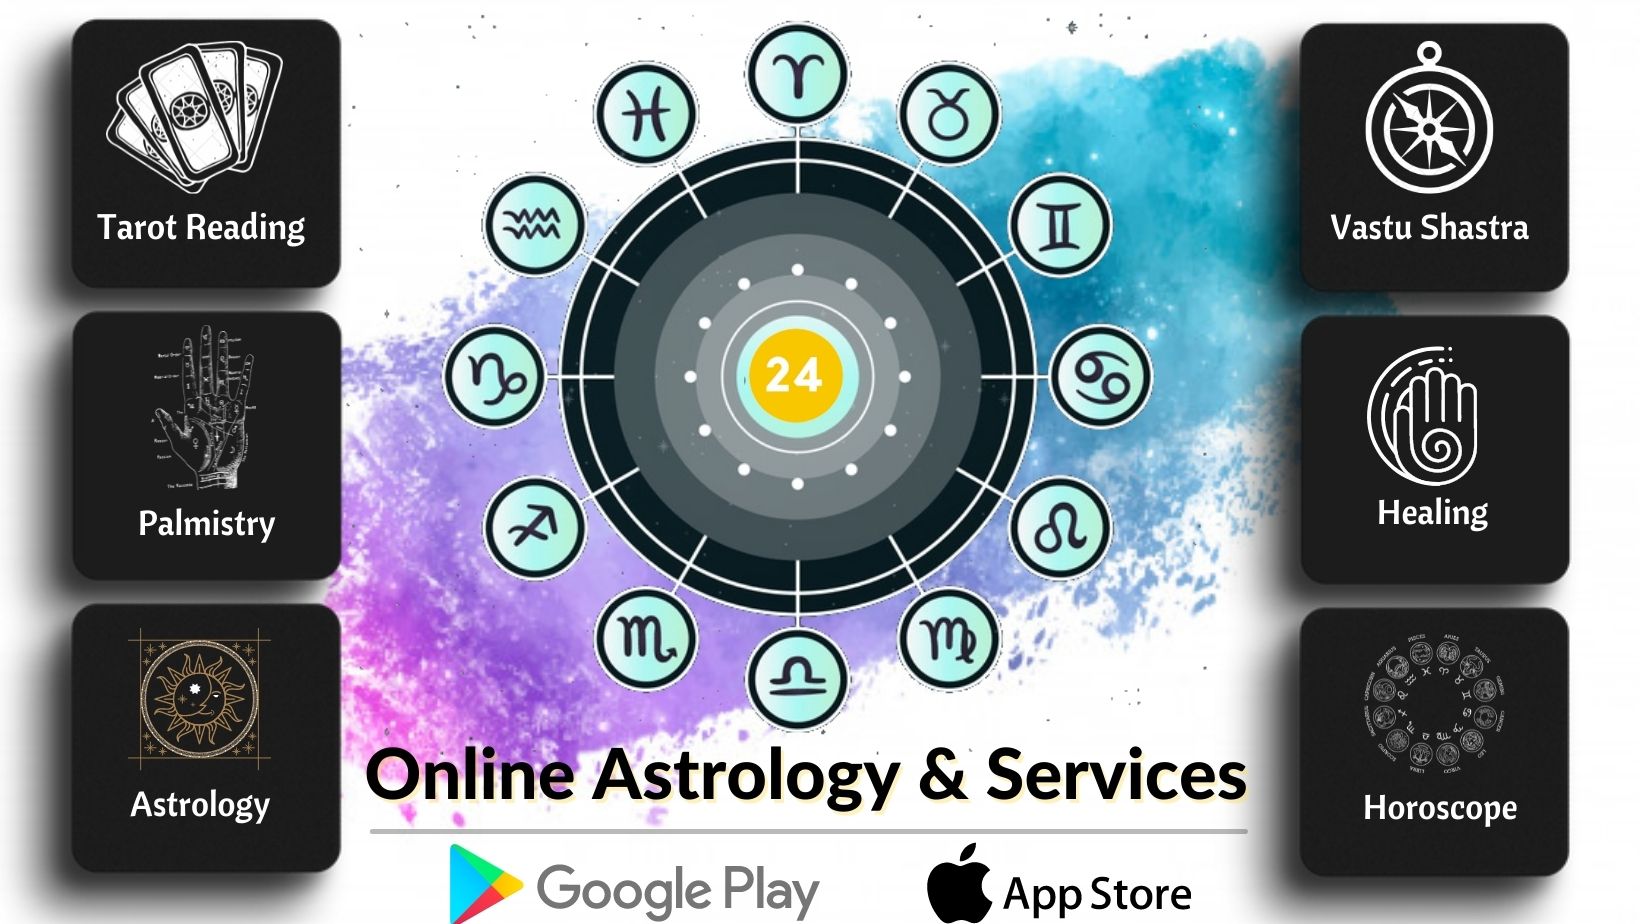 Snitid Astrology & Services

 

BP Google Play «a App Store